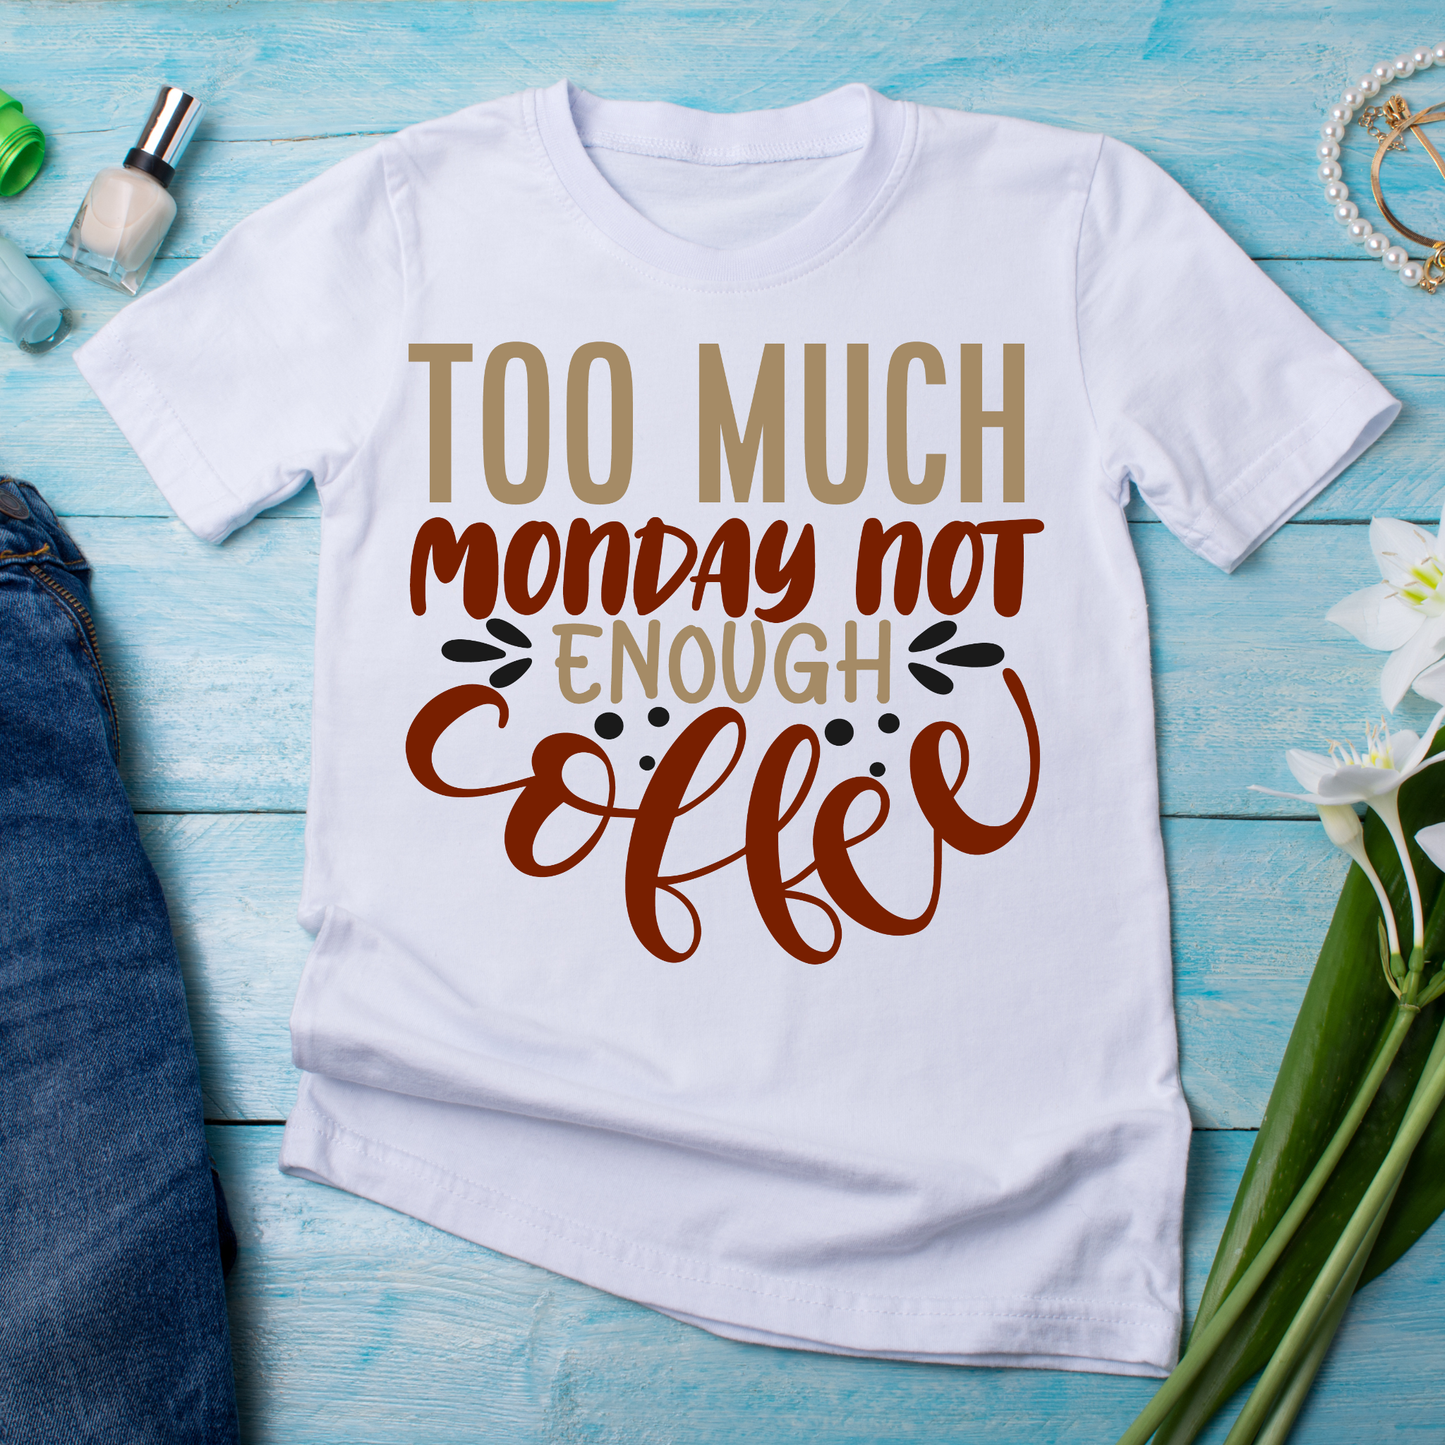 Too much monday not enough coffee - Women's funny t-shirt